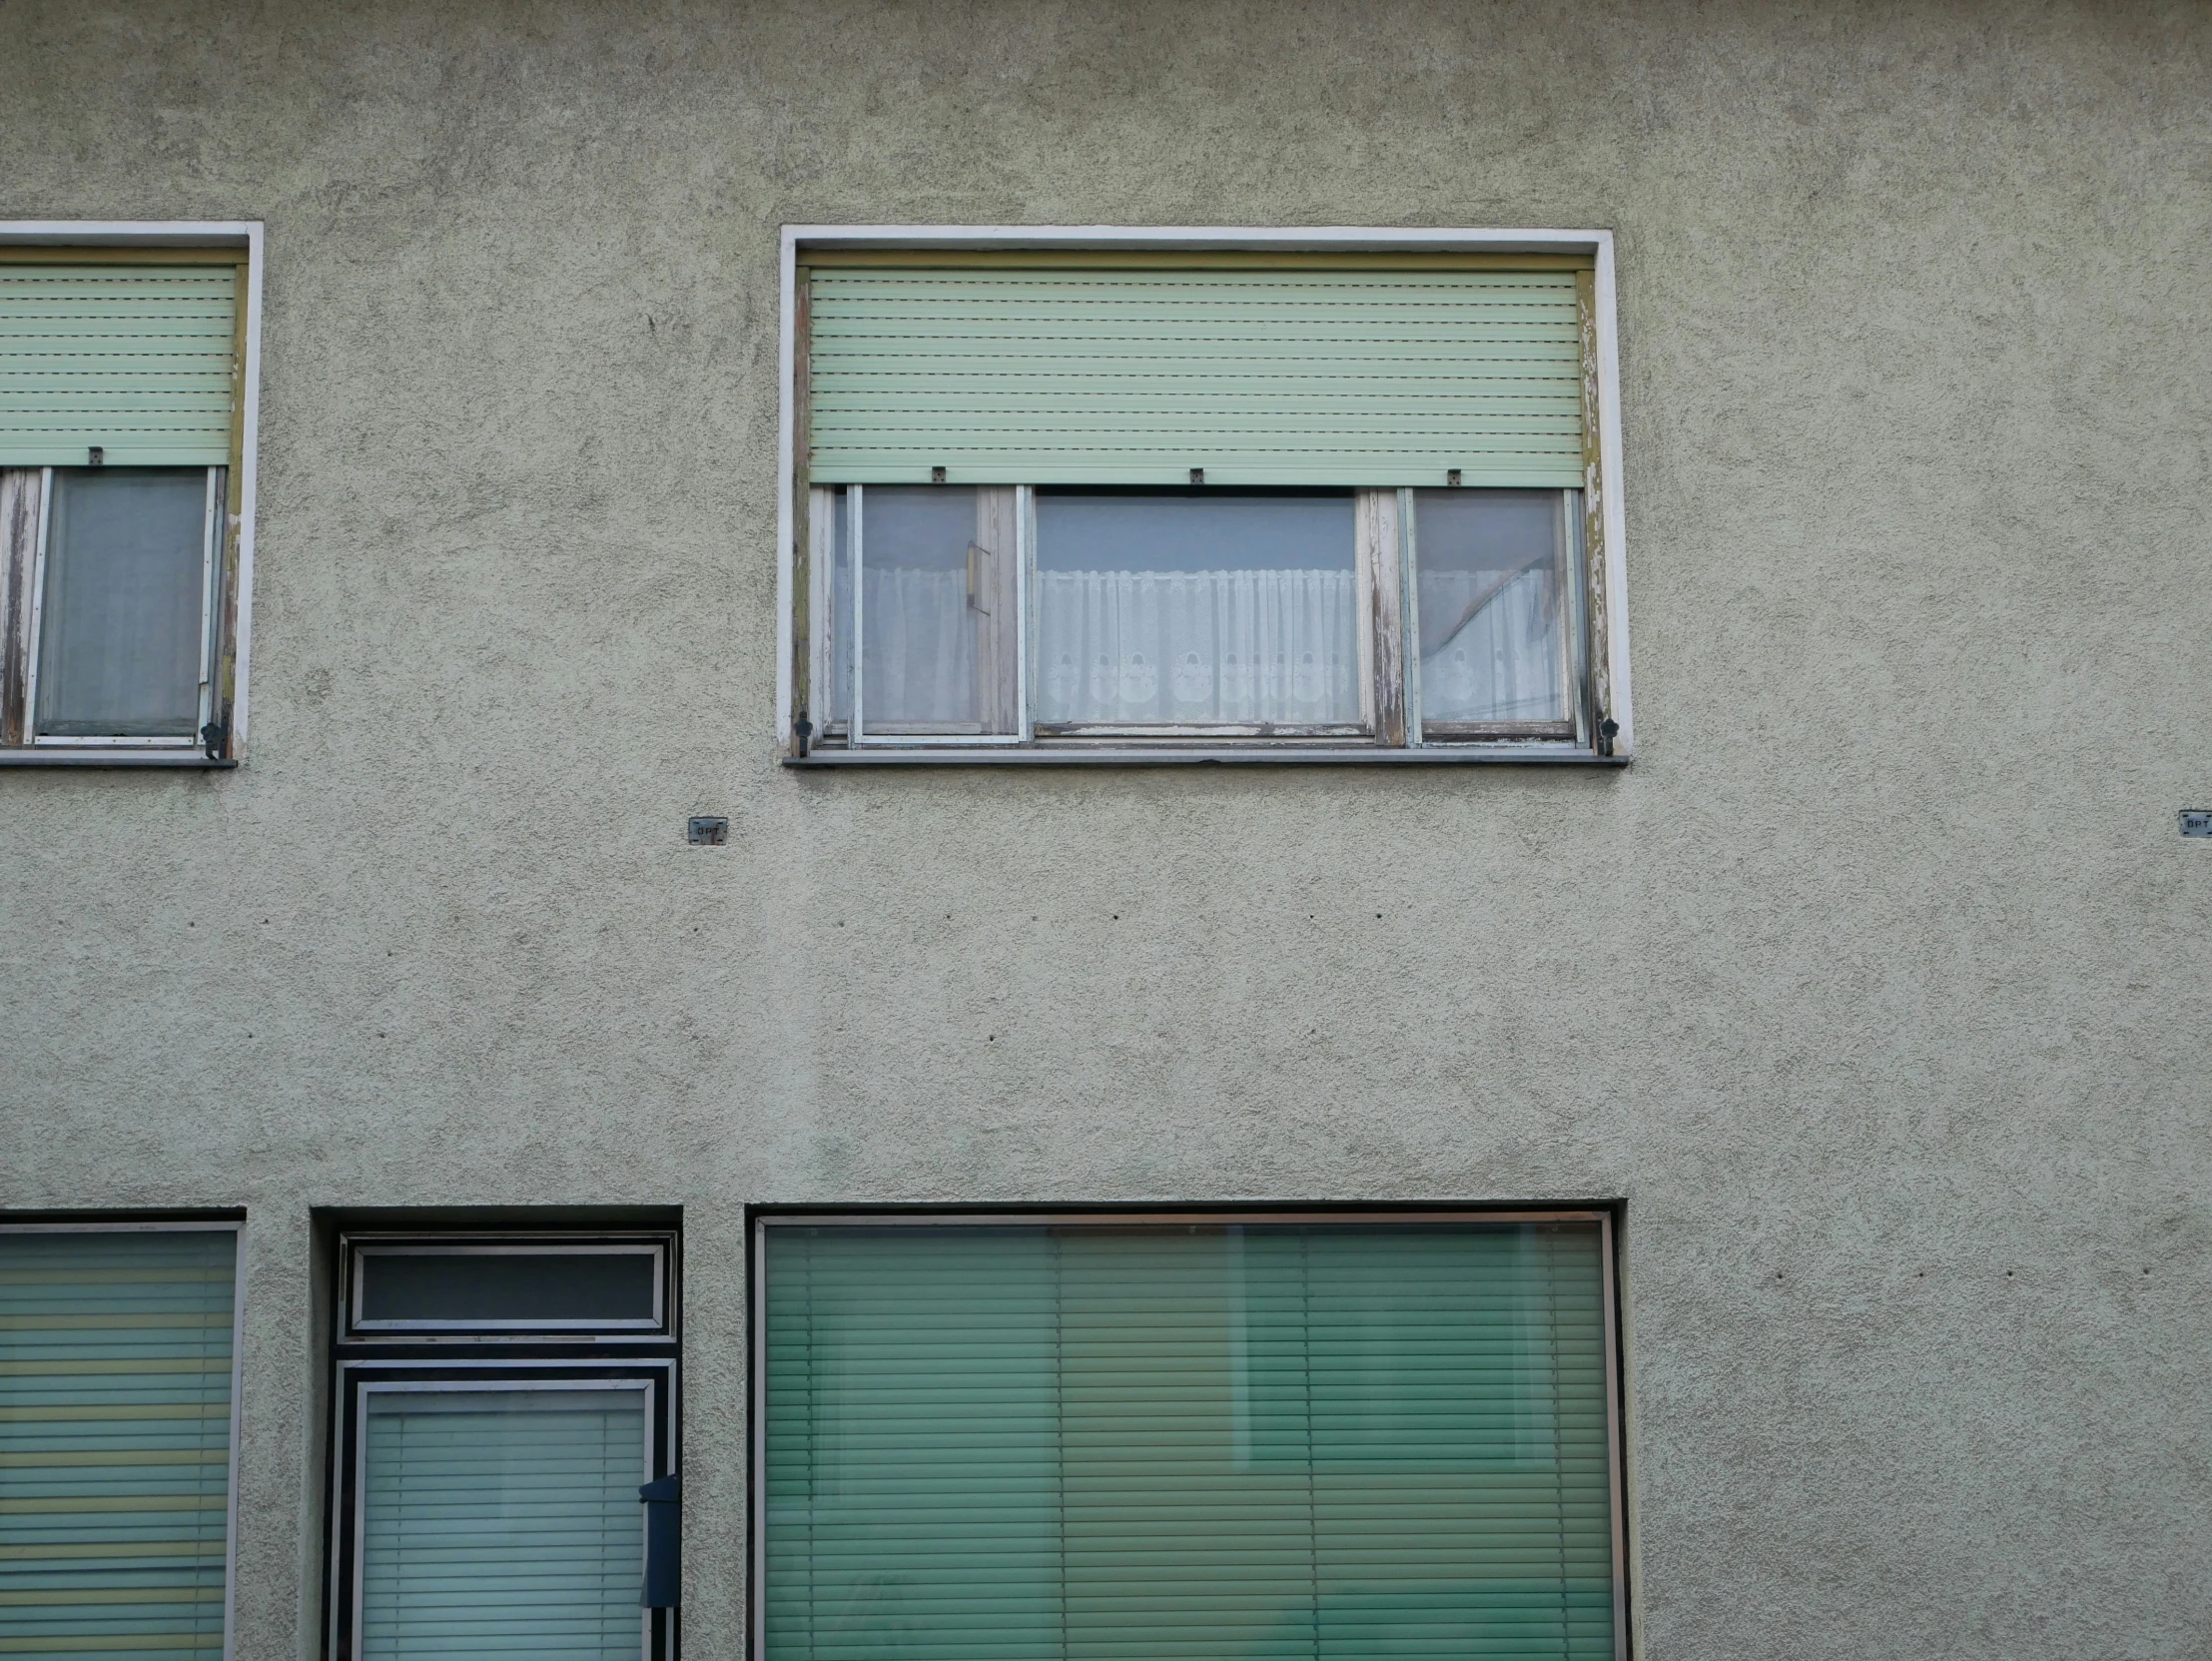 two empty windows that are above a window with no curtains